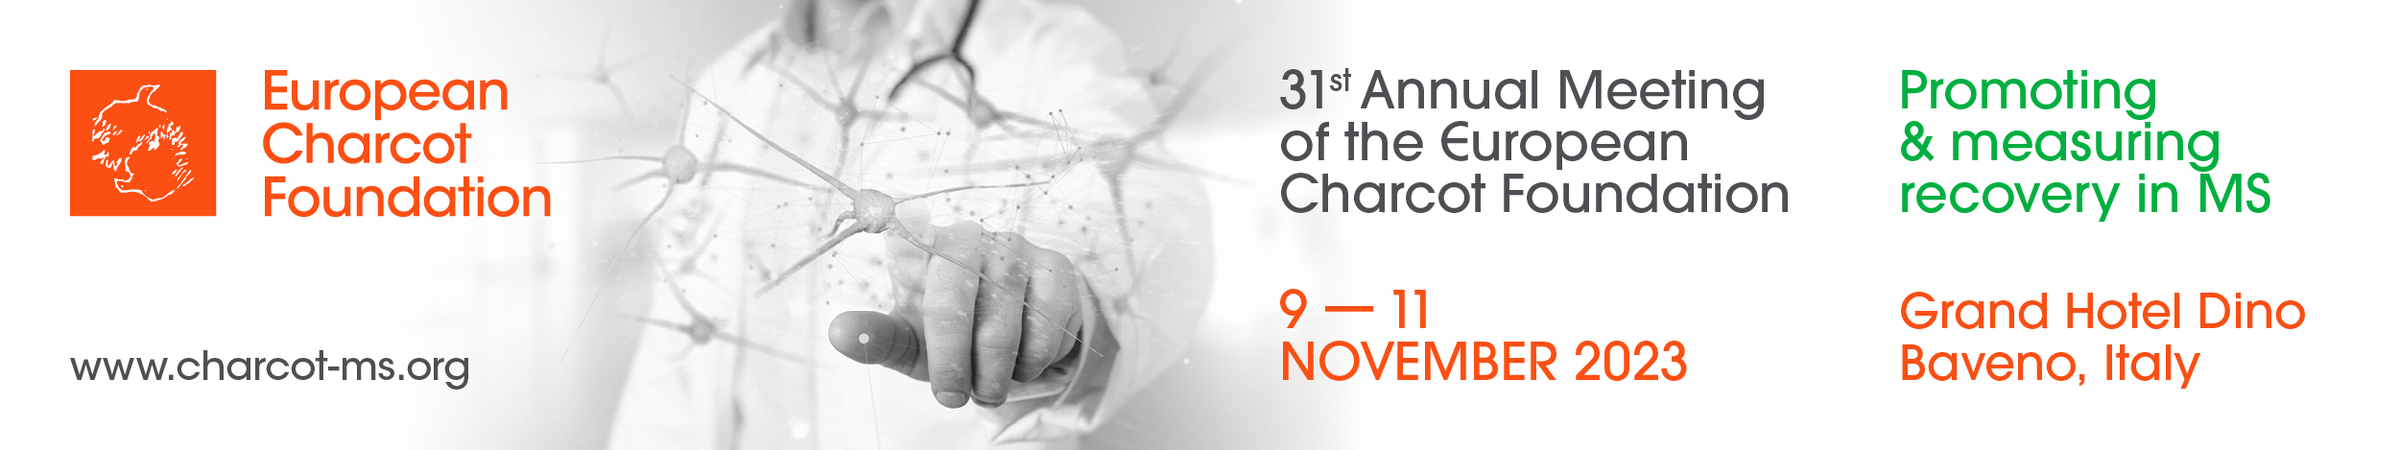 31st Annual Meeting of the European Charcot Foundation, 9 - 11 November 2023, Baveno